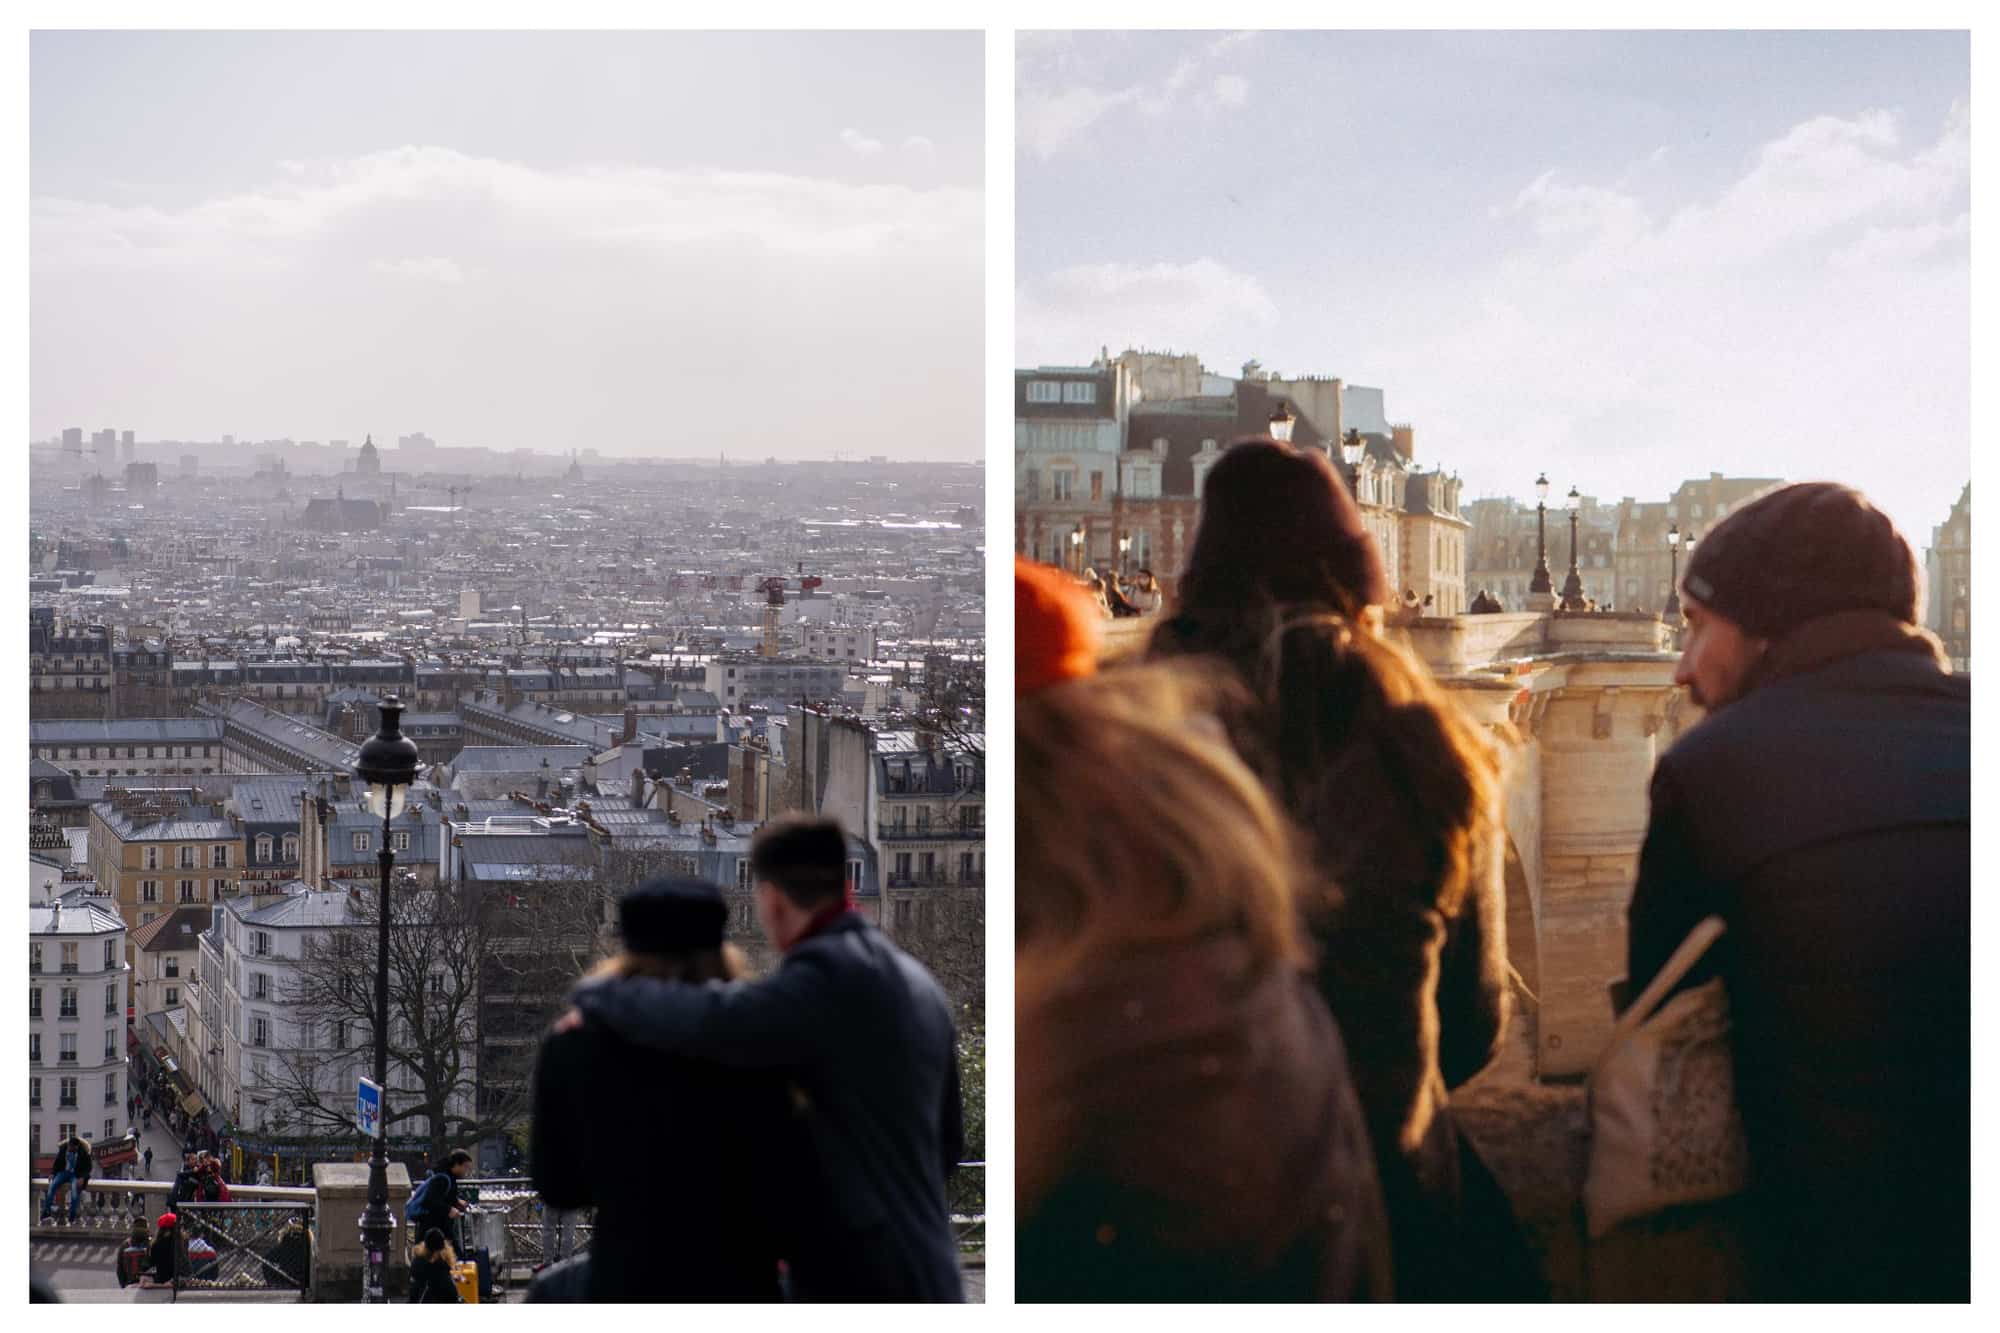 Left: A couple are seen together on the stairs of the Sacre Coeur overlooking the Parisian skyline. Right: A couple are together by the Seine, near the Pont Neuf, during sunset.